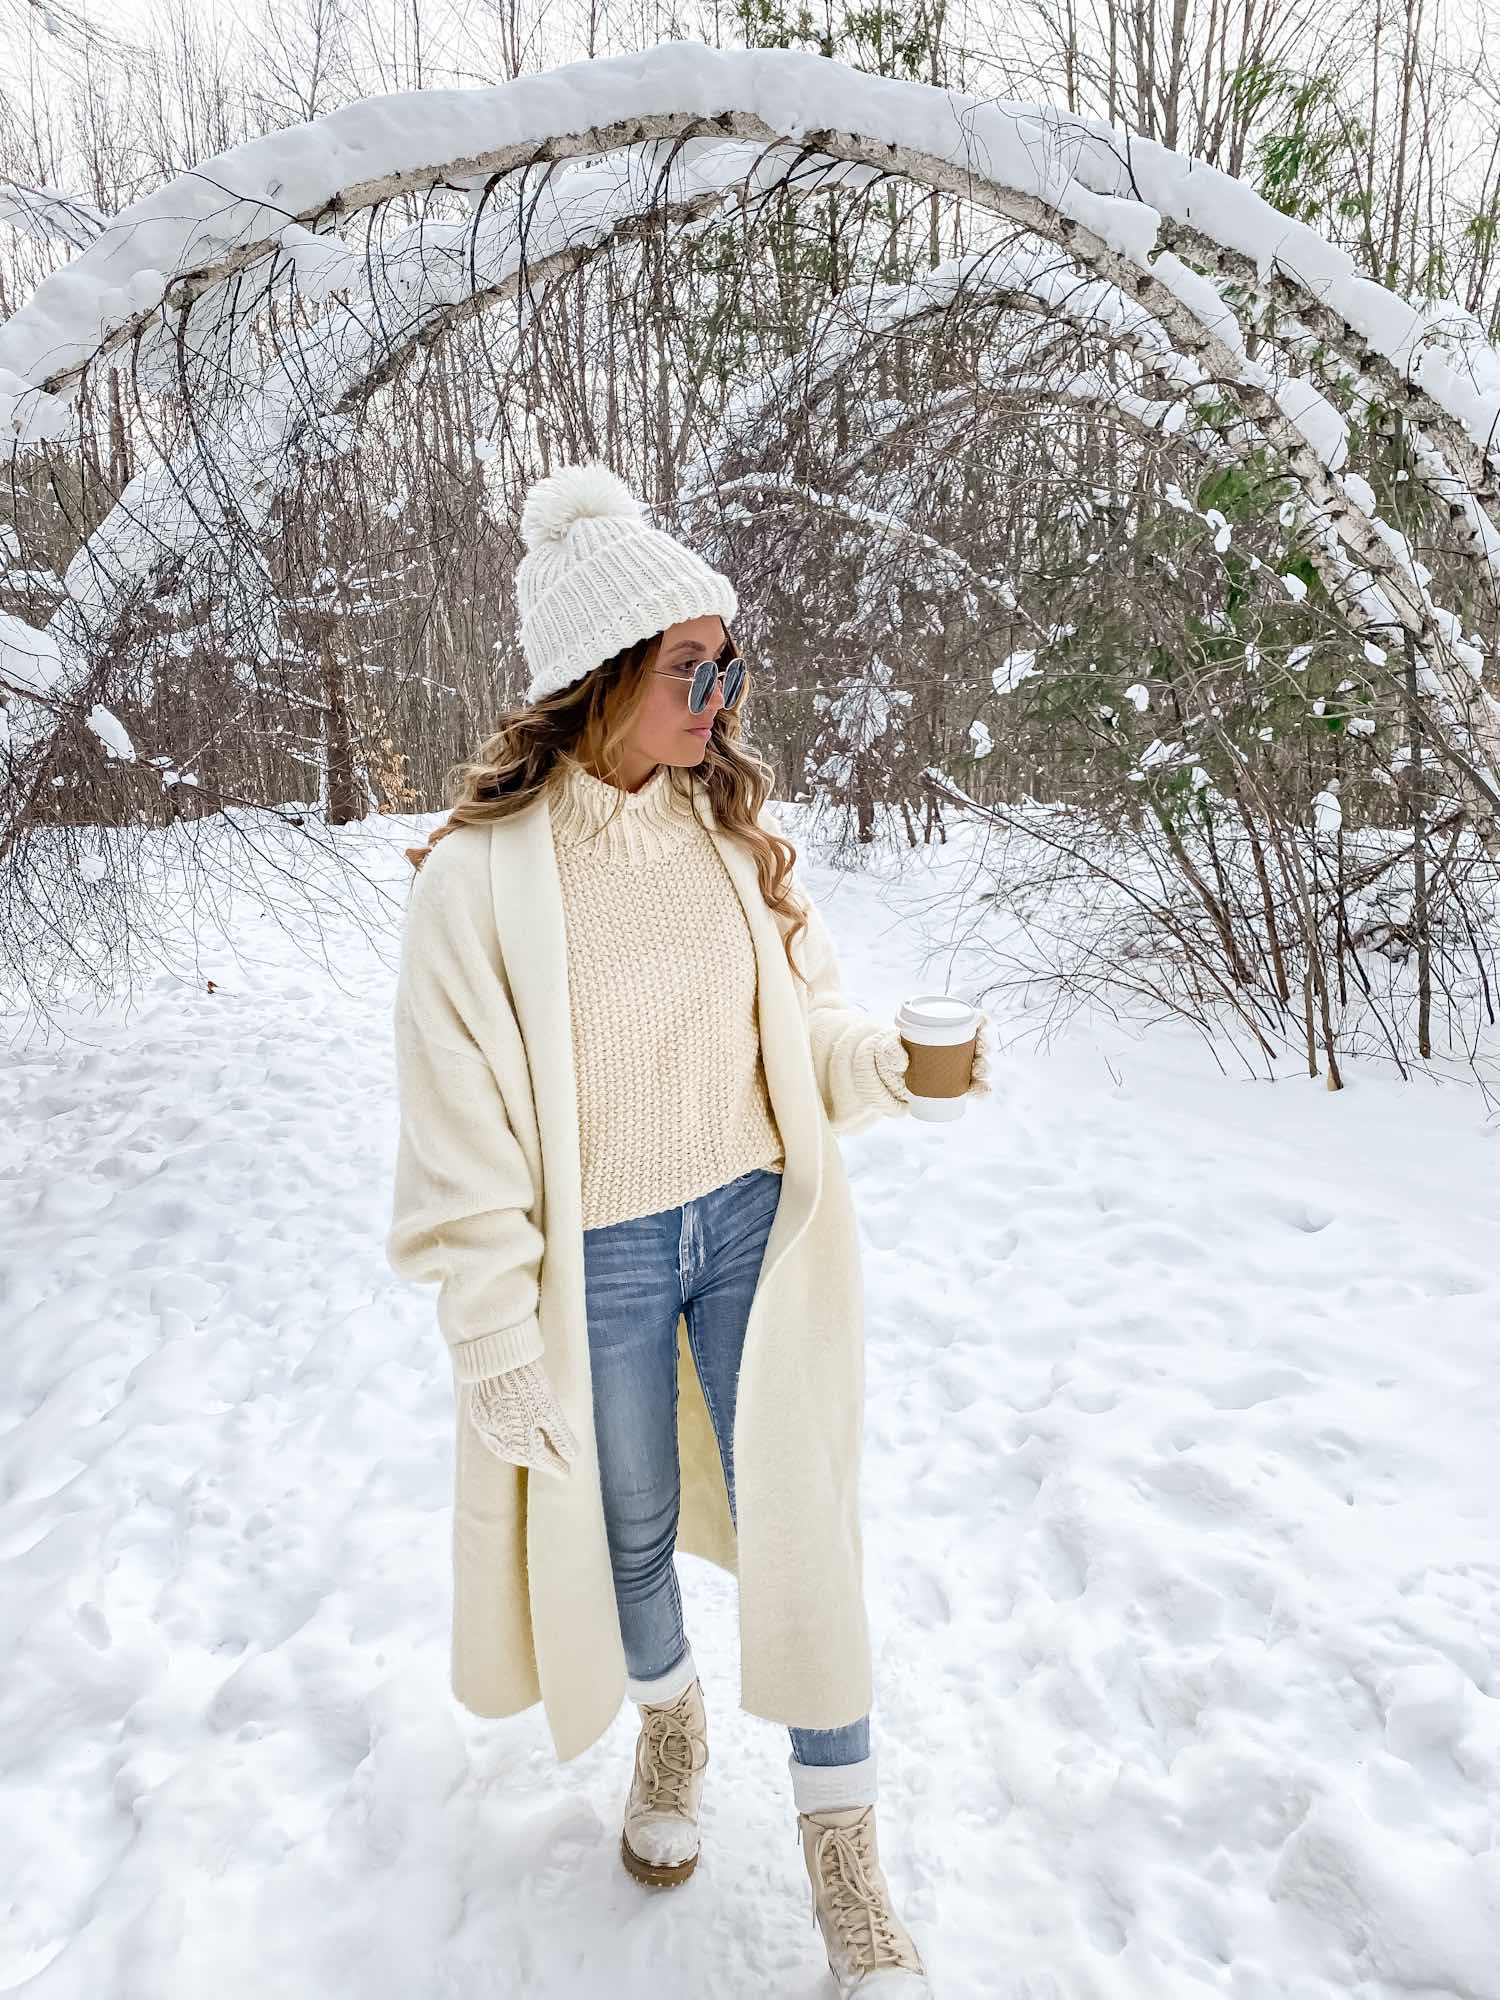 Cute Winter Outfit Ideas To Nail That Cozy Chic Look This Season —  Neutrally Nicole